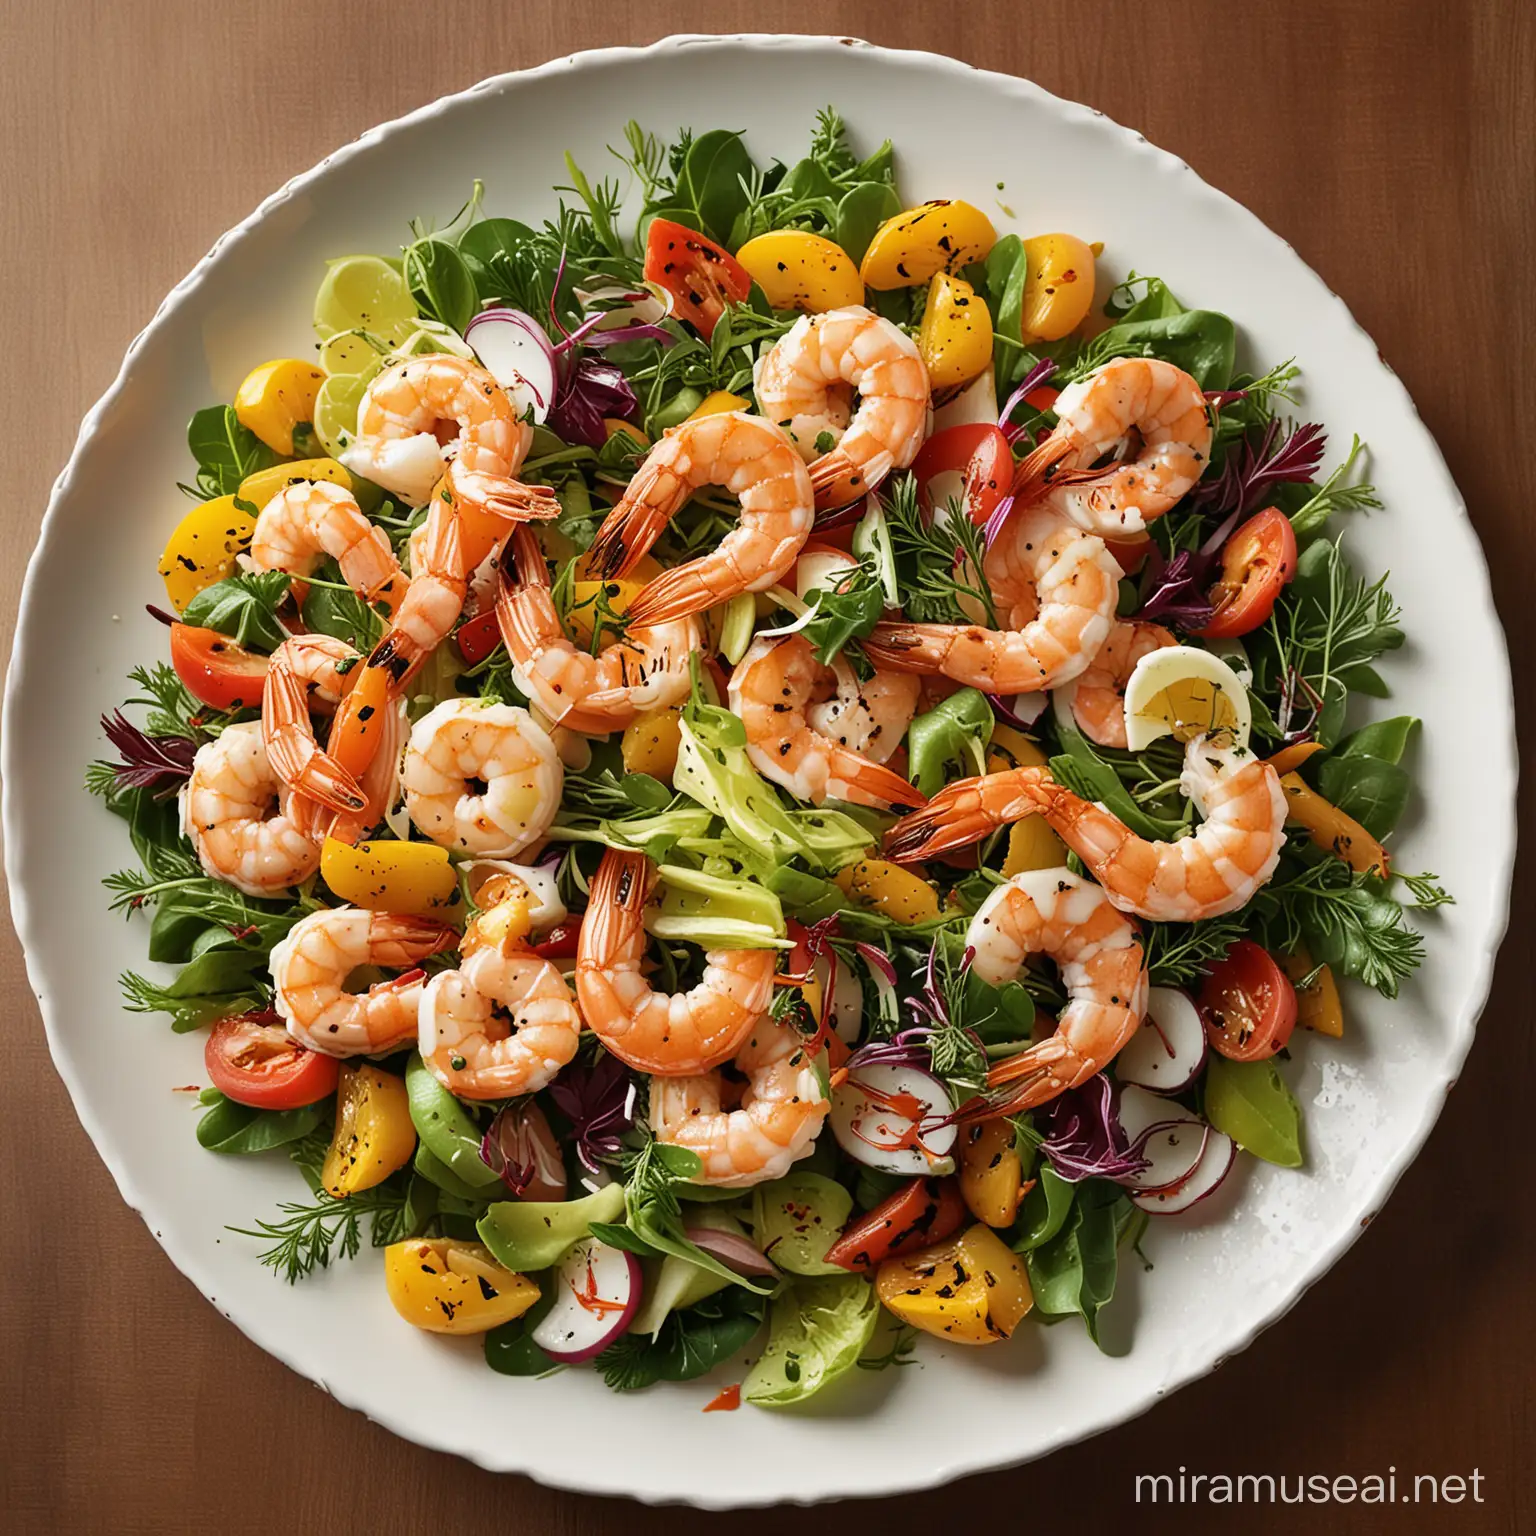 Delicious Shrimp Salad with Vibrant Greens and Fresh Vegetables